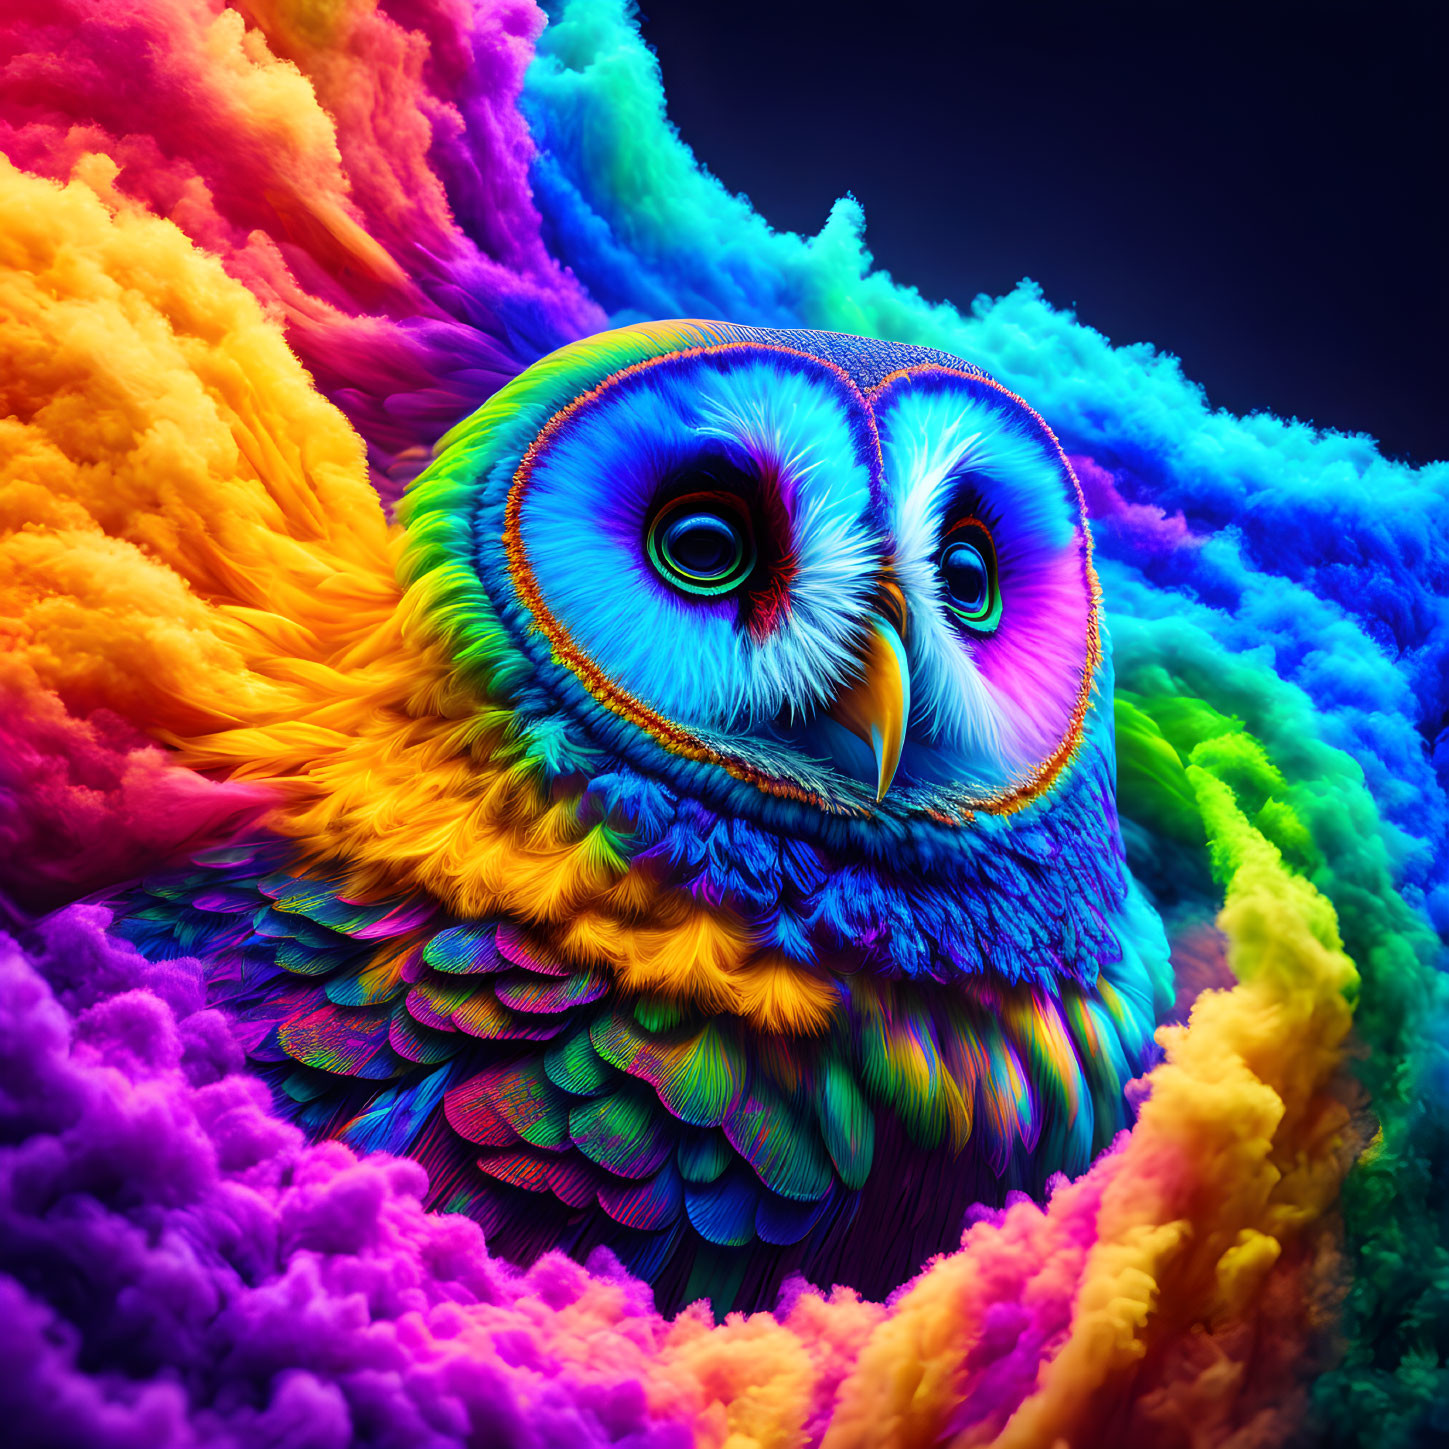 Colorful Neon Owl Contrasted with Dark Swirling Clouds